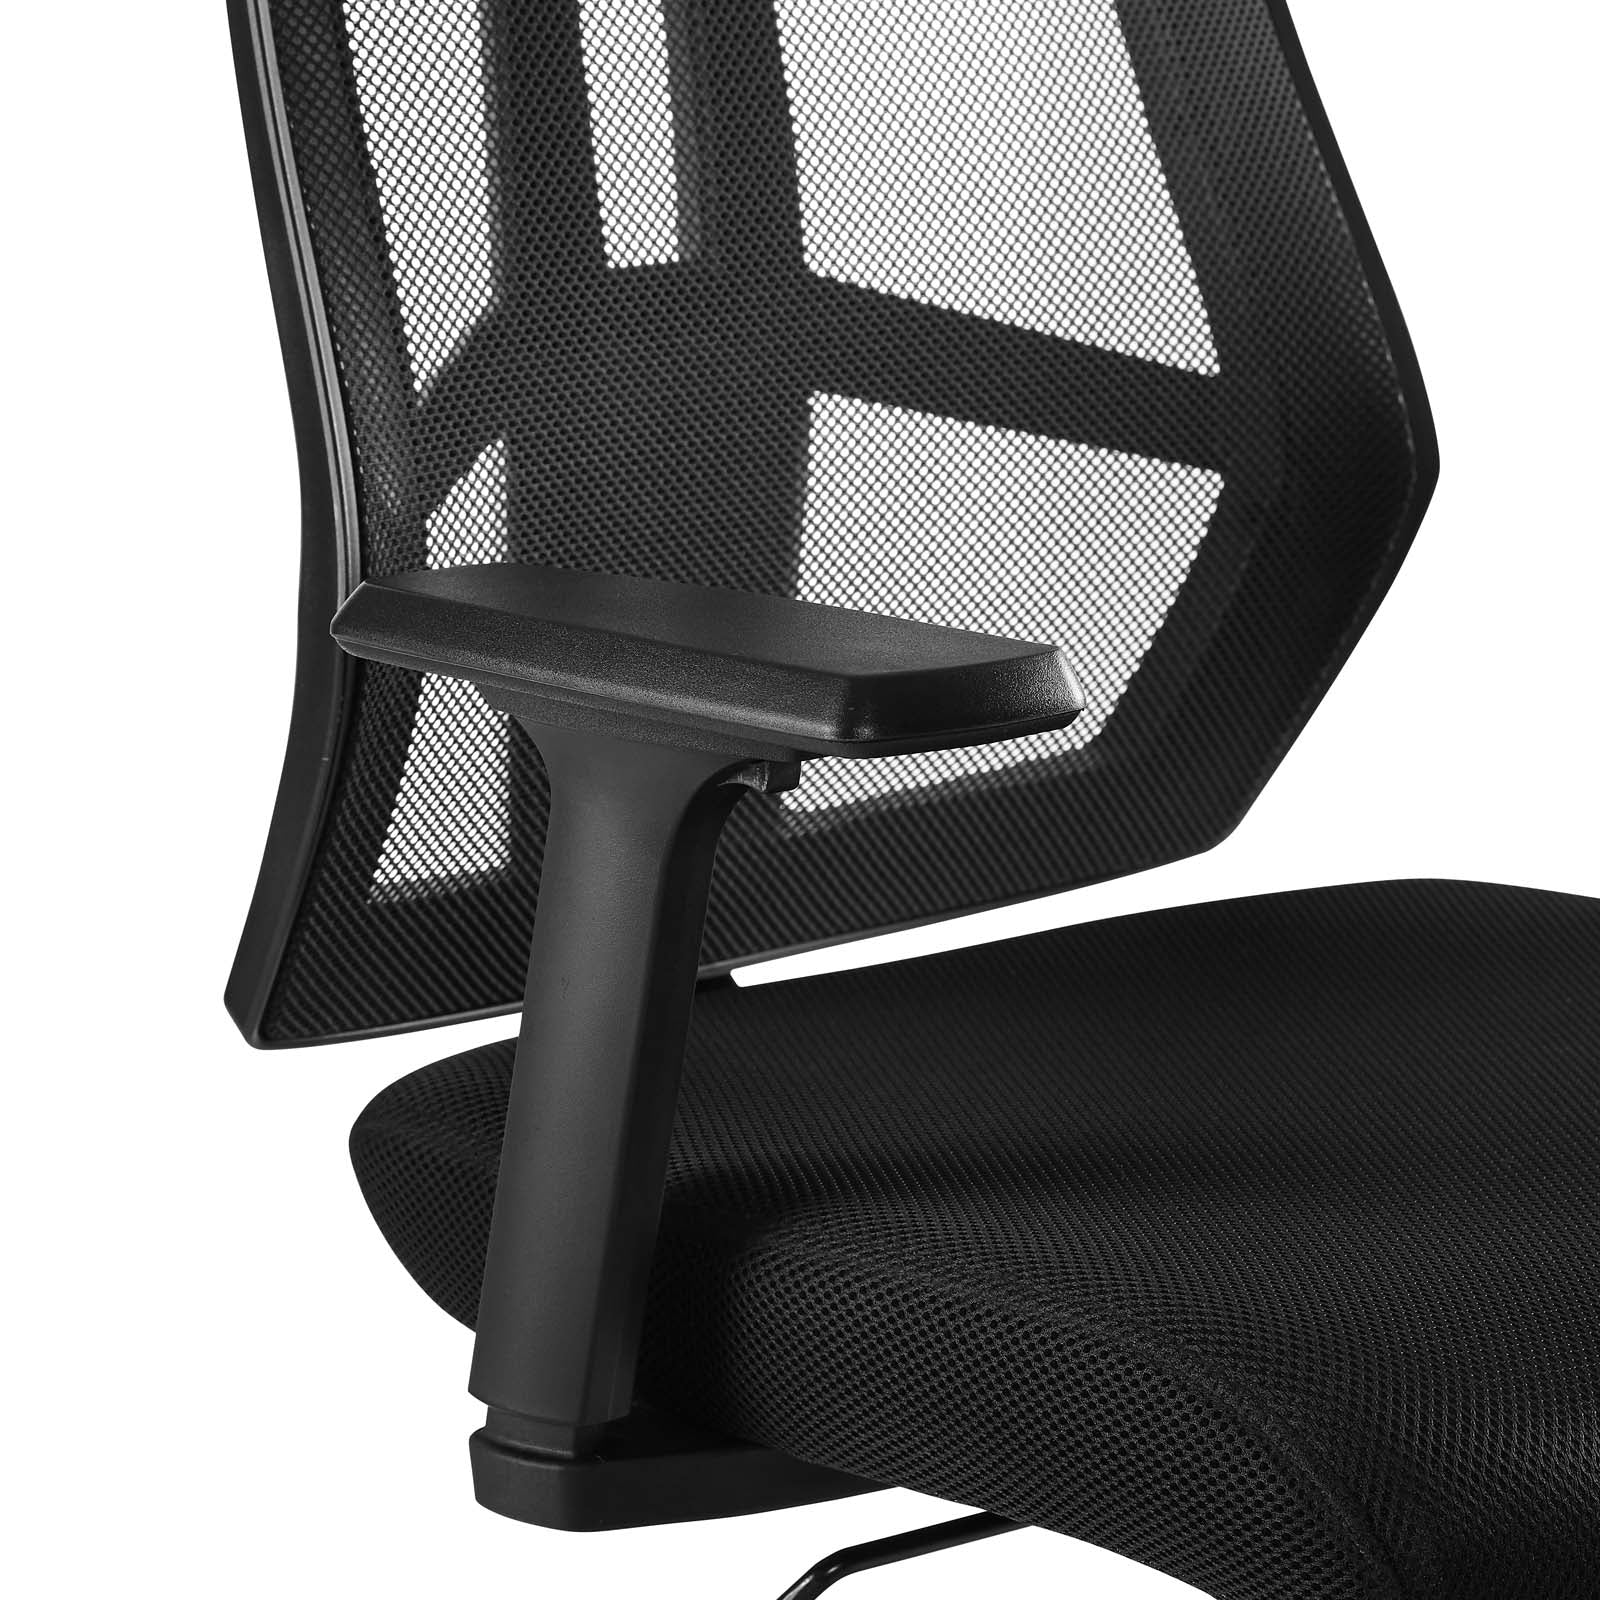 Mesh Drafting Chair for Executives | Office Furniture by BUILDMYplace 